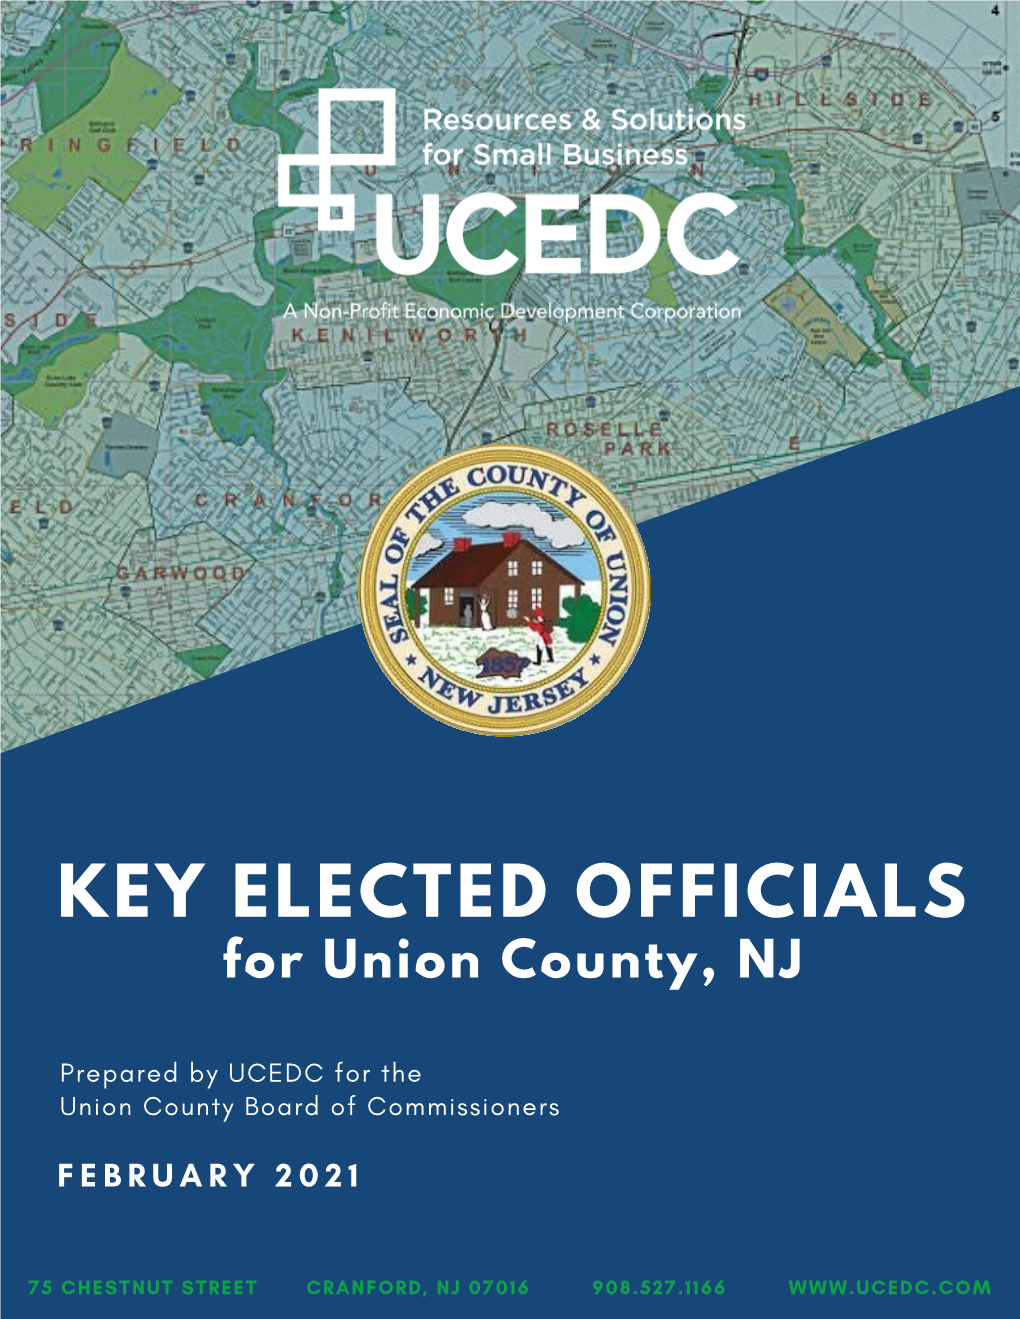 KEY ELECTED OFFICIALS for Union County, NJ